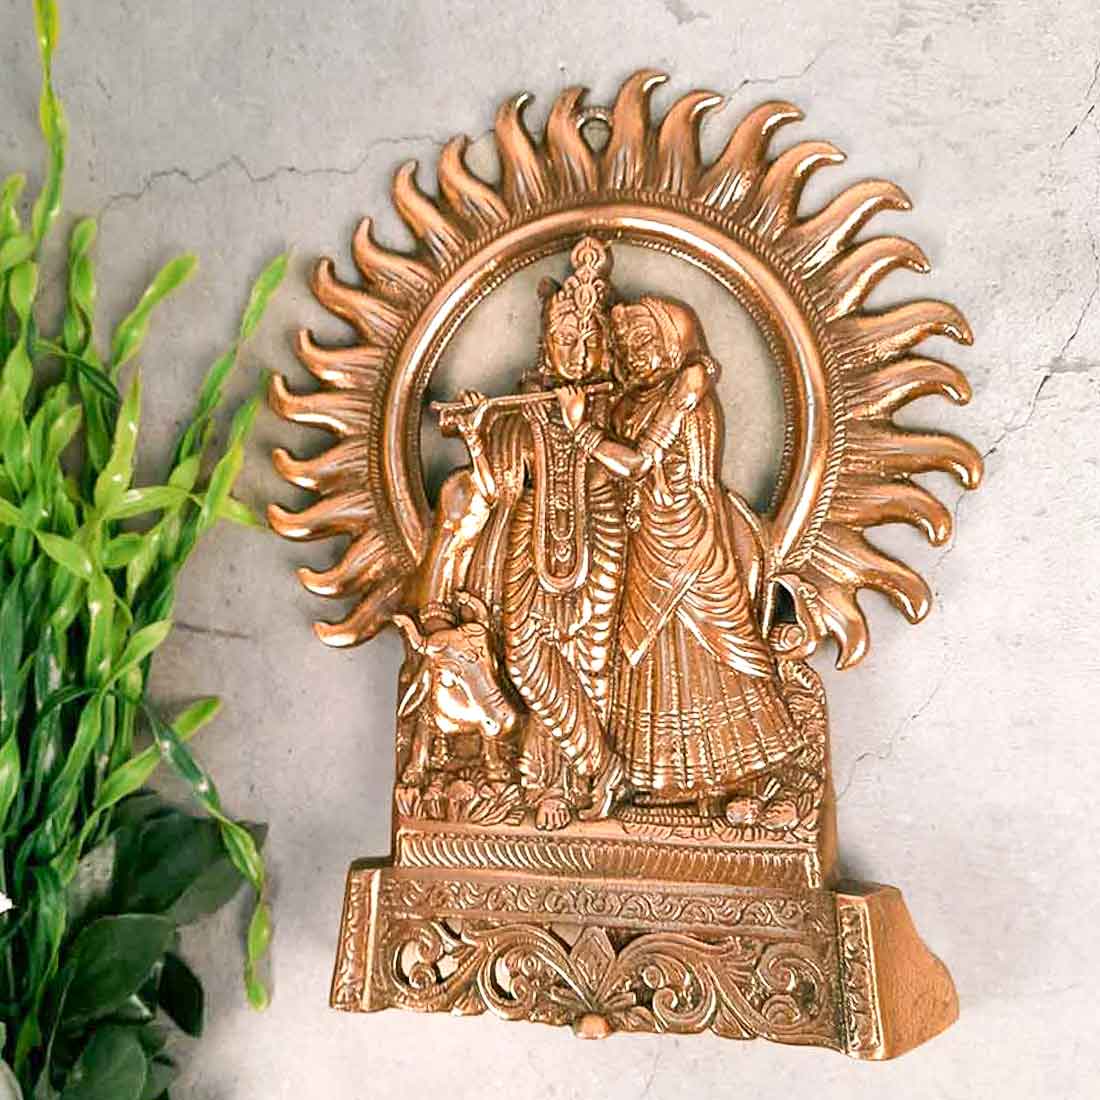 Radha Krishna Wall Hanging Idol | Shri Radha Krishna Playing Flute With Cow Wall Hanging Art Statue Murti | Religious & Spiritual Sculpture - for Gift, Home, Living Room, Office, Puja Room Decoration  - 11 Inch